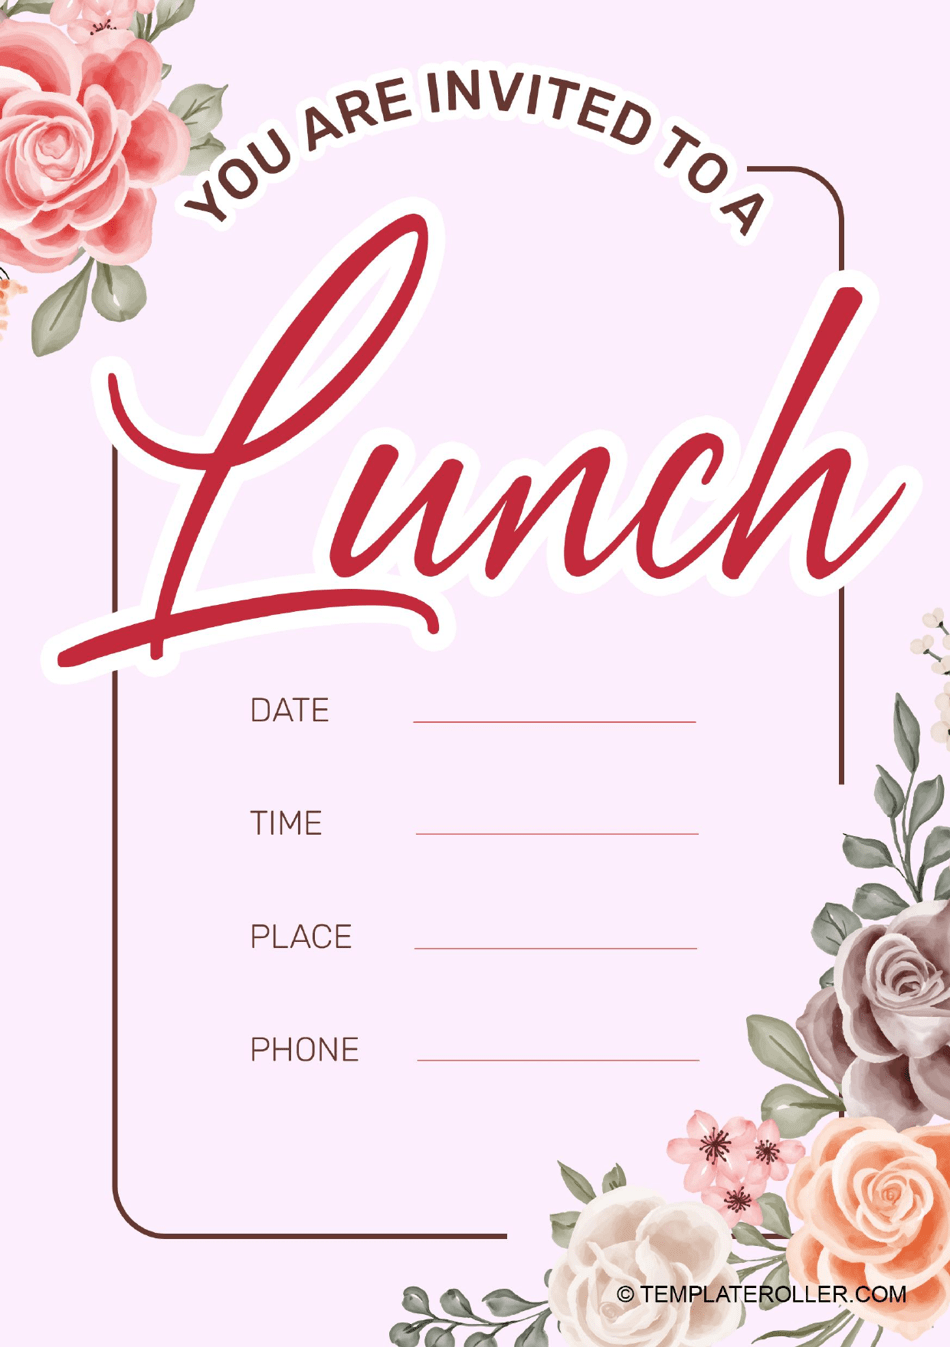 Lunch Invitation Template - Pink image preview